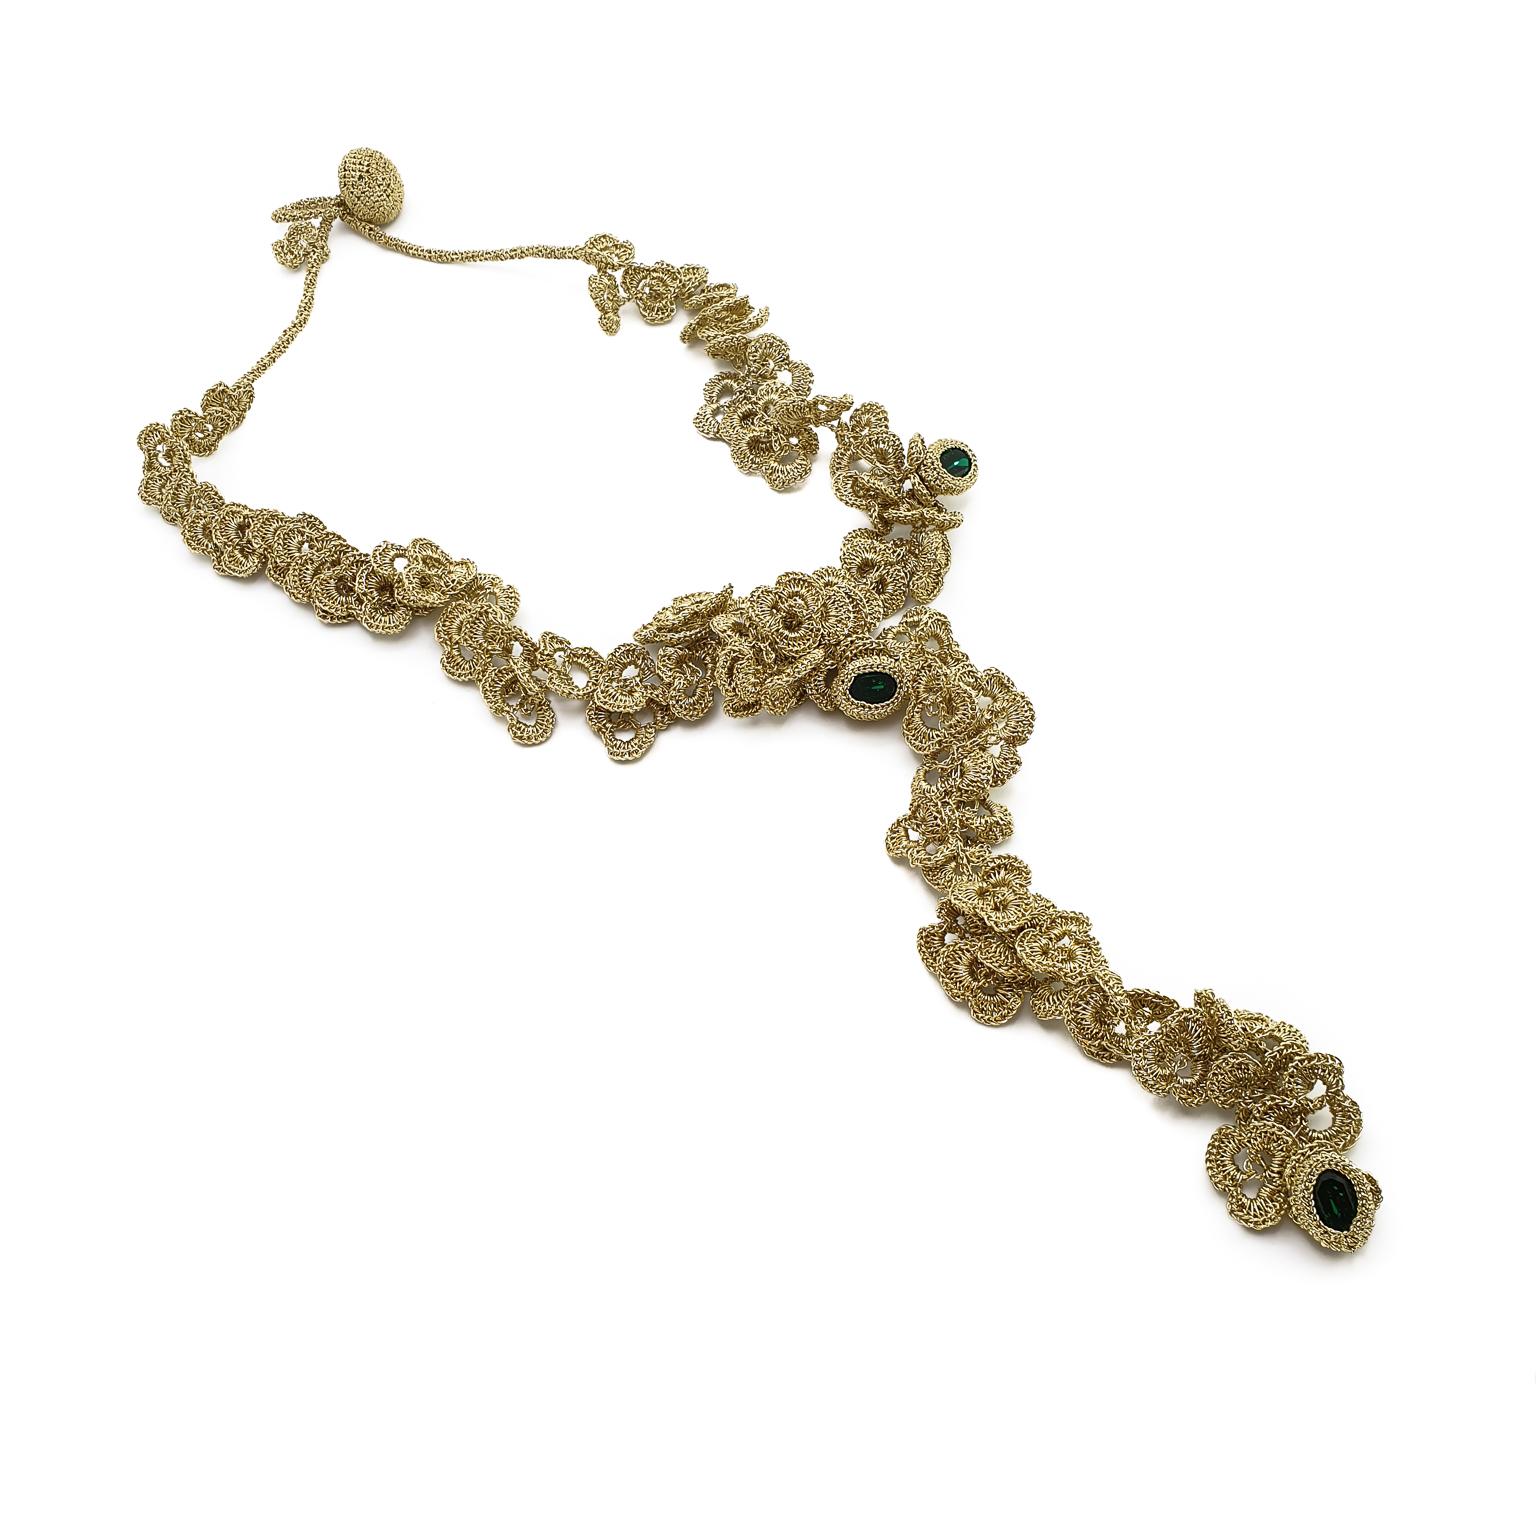 This is an Art Nouveau style crochet necklace. This necklace can be custom made and the choice of stones can be altered.

The necklace is crochet with a smooth passing thread. It is a cotton thread coated with a gold color polymer. It has no metal